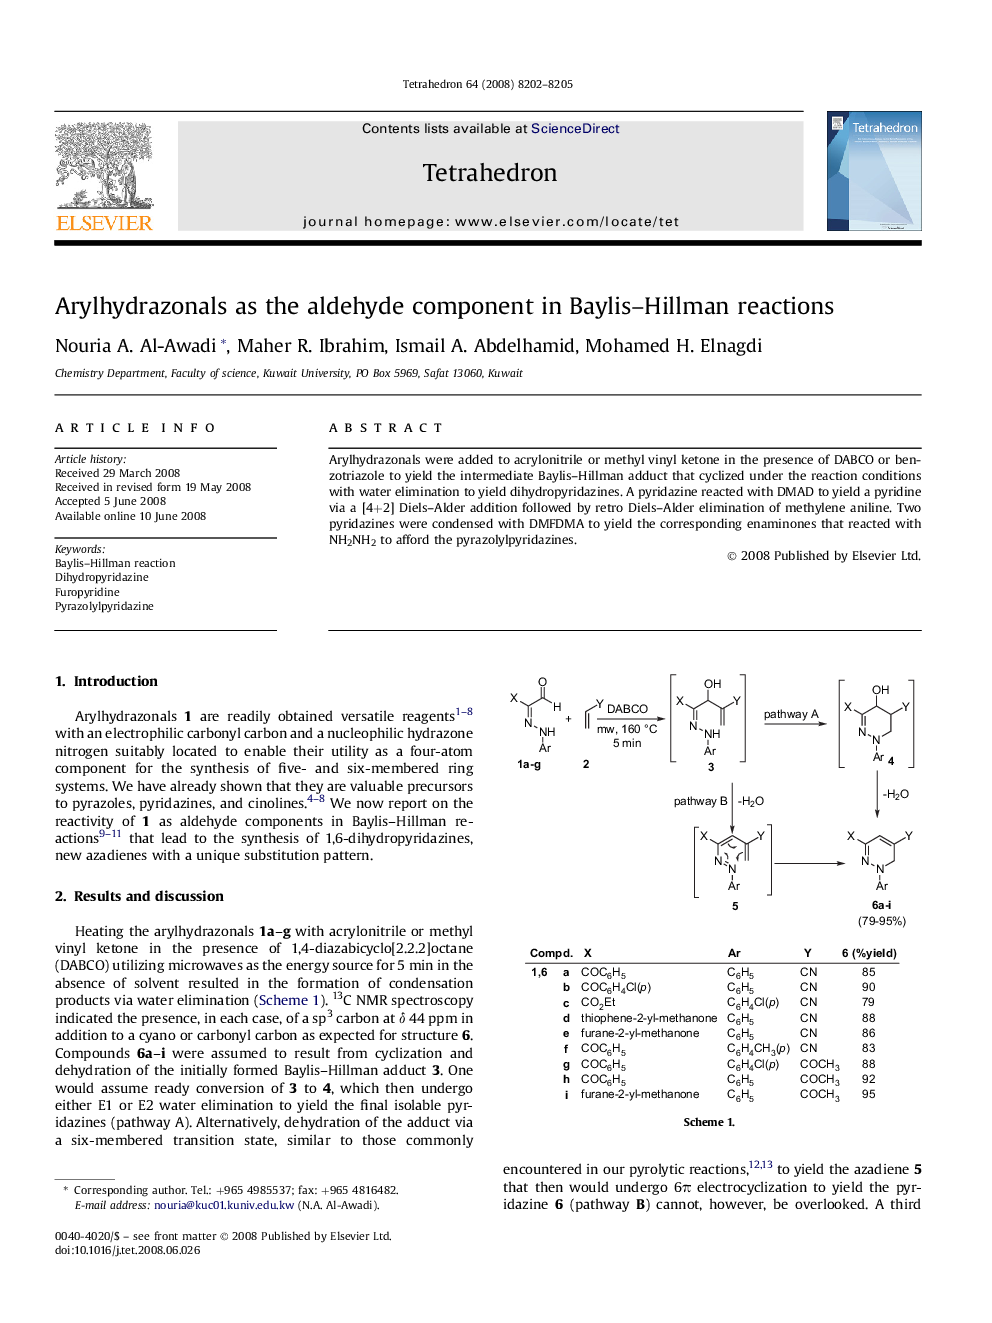 Arylhydrazonals as the aldehyde component in Baylis-Hillman reactions